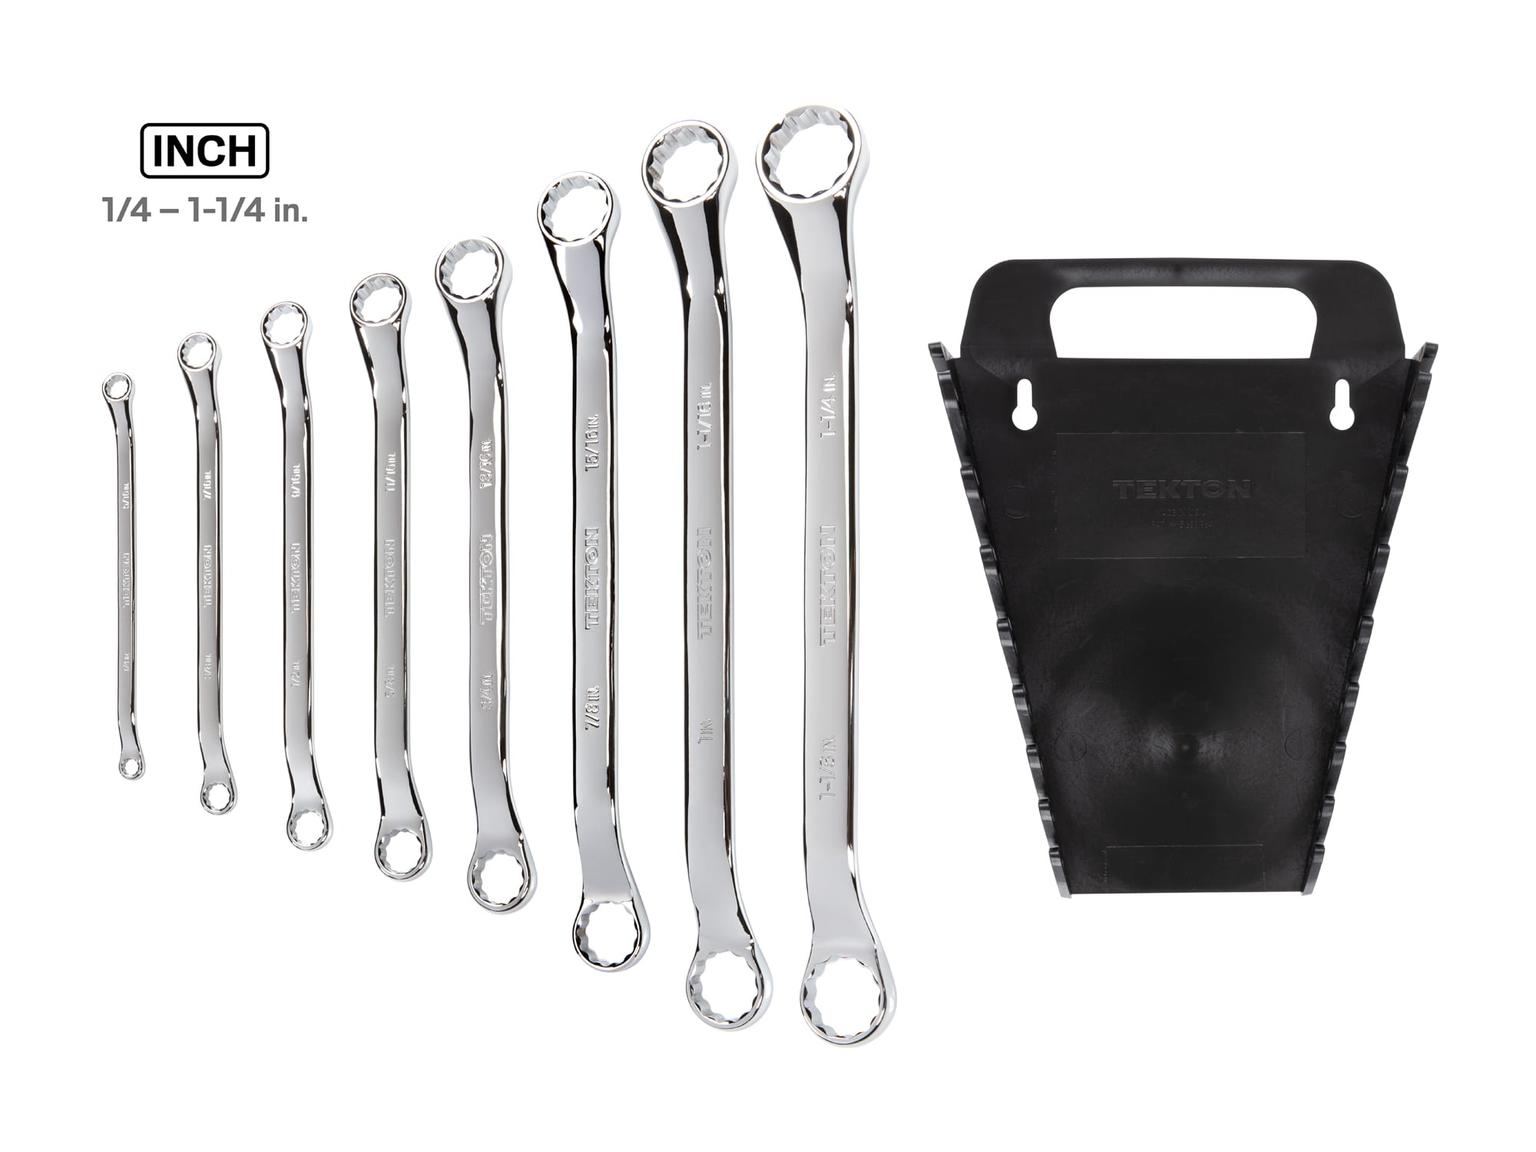 TEKTON WBE23408-T 45-Degree Offset Box End Wrench Set with Holder, 8-Piece (1/4 - 1-1/4 in.)